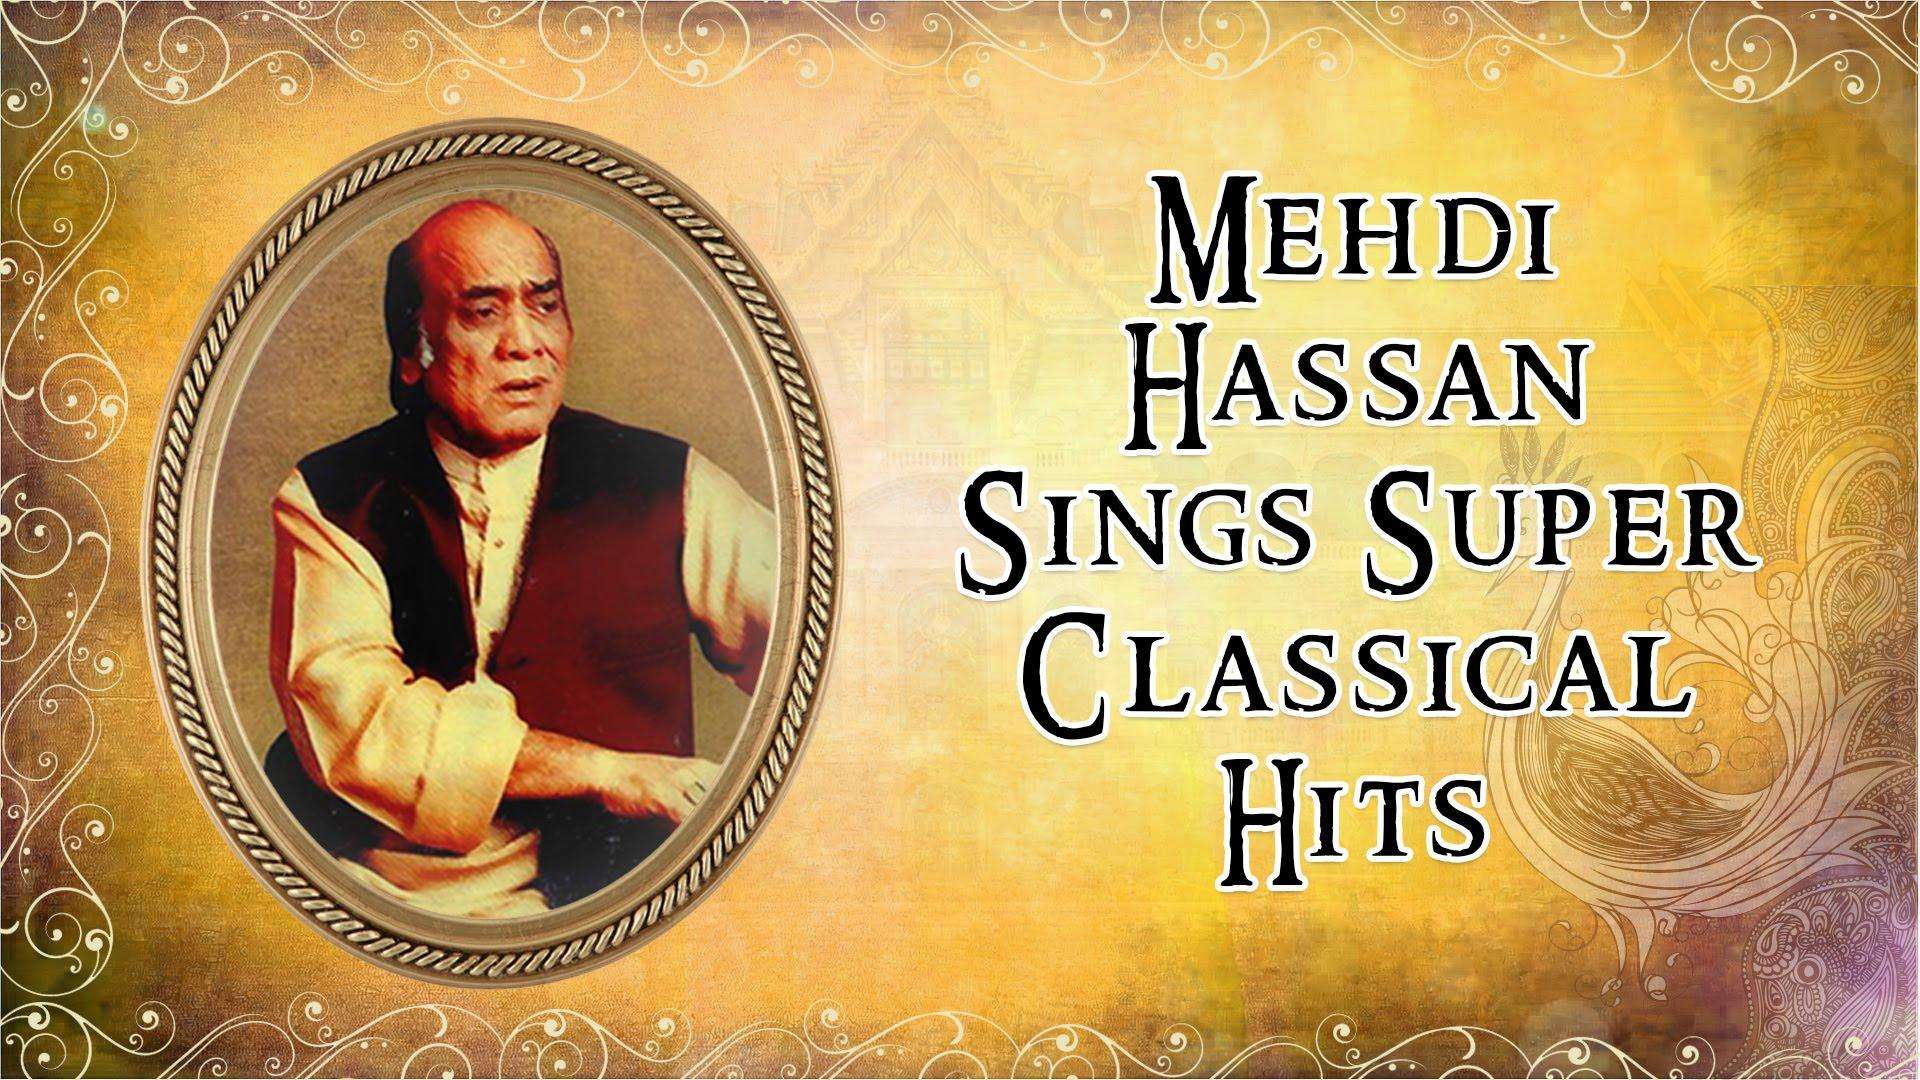 Add some pinch of romance in your evening with ghazals of Mehandi Hassan